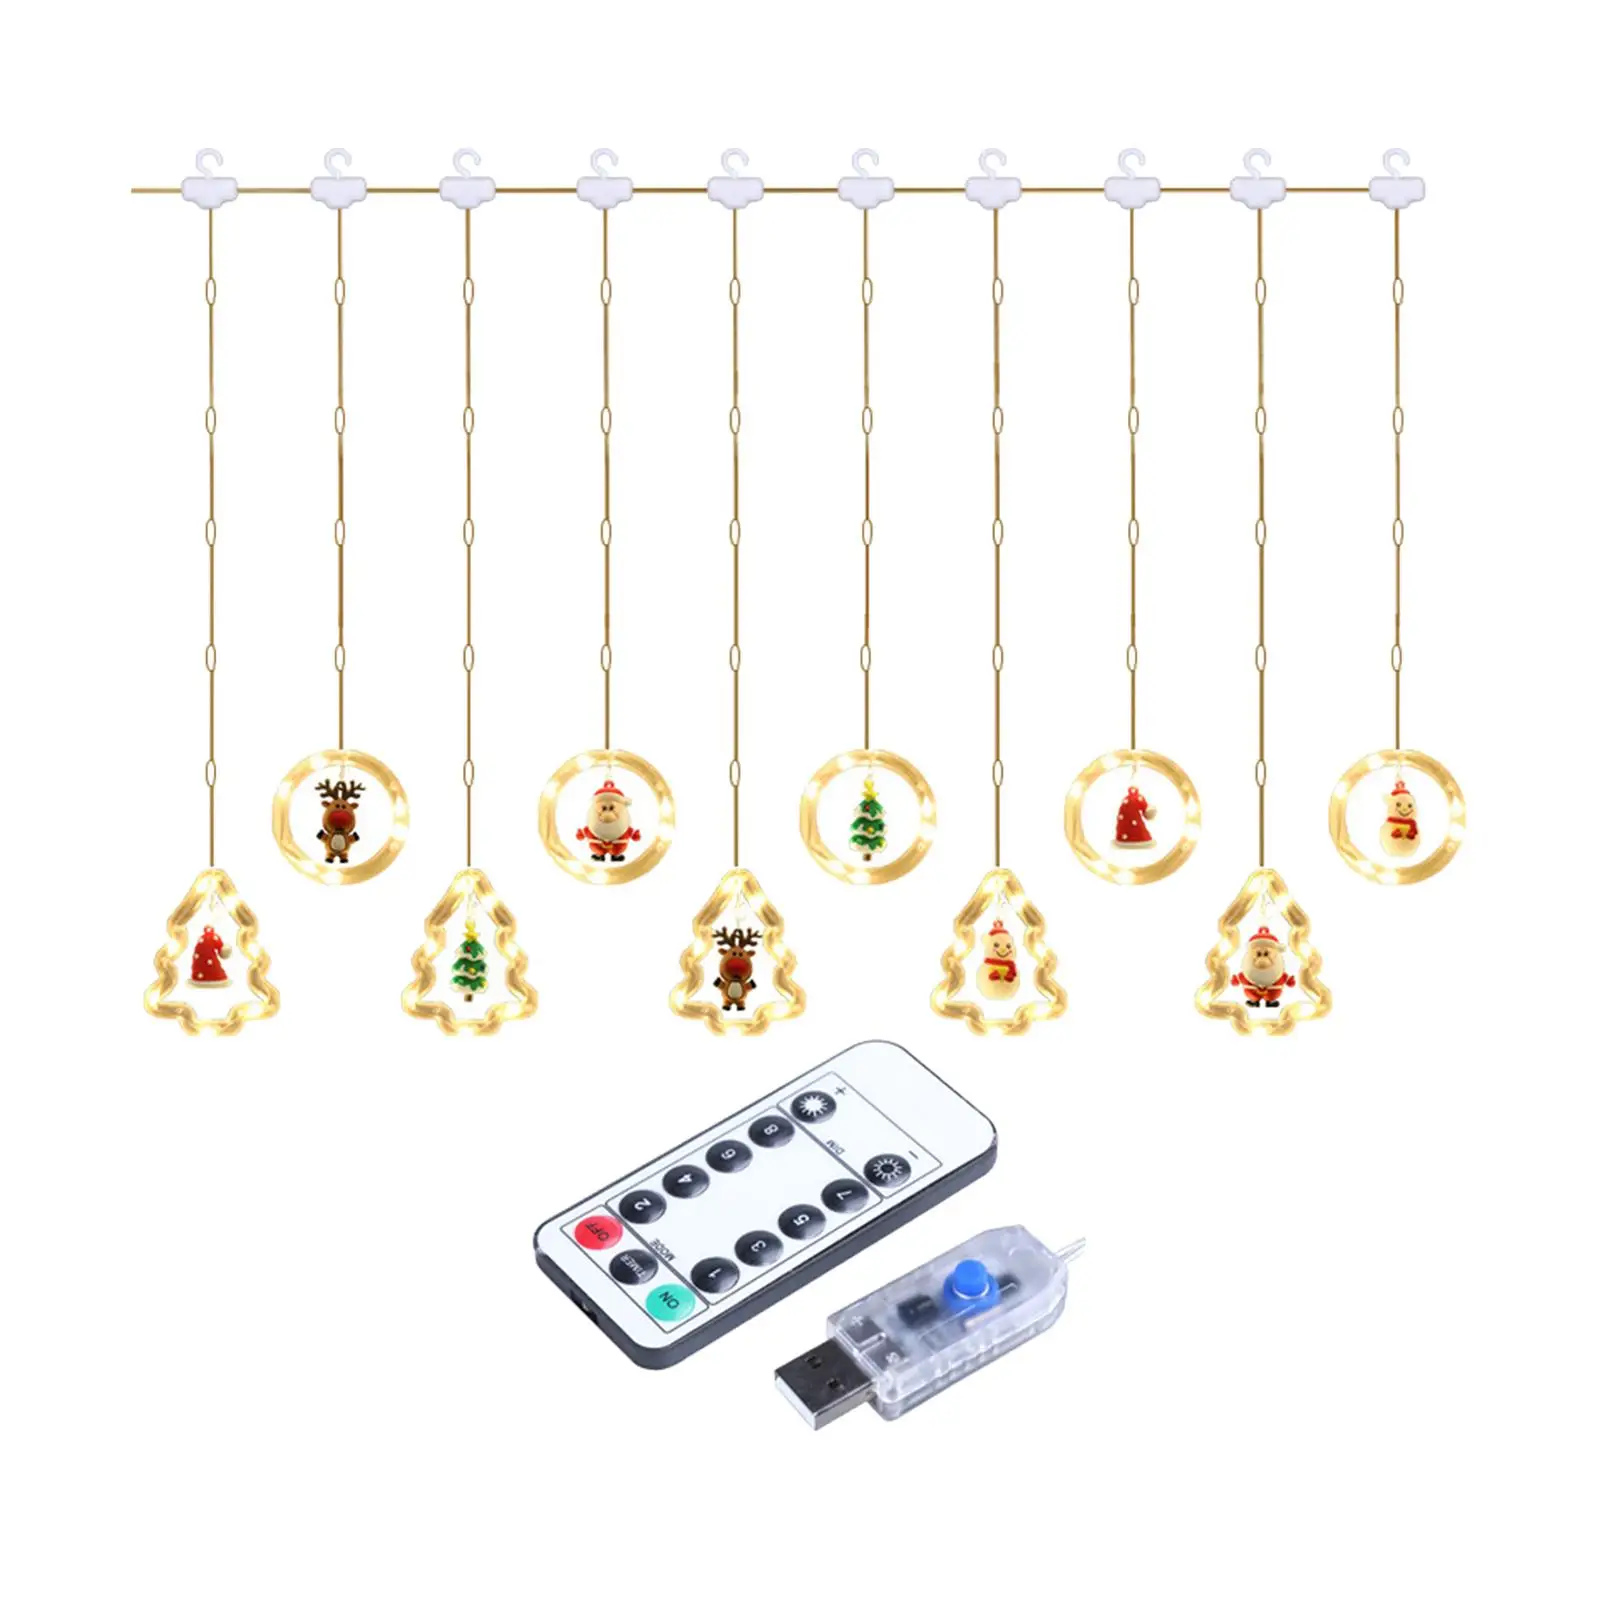 LED Christmas String Light Lighting Remote Control Hanging Ornament for Party Bar Yard Window Decoration